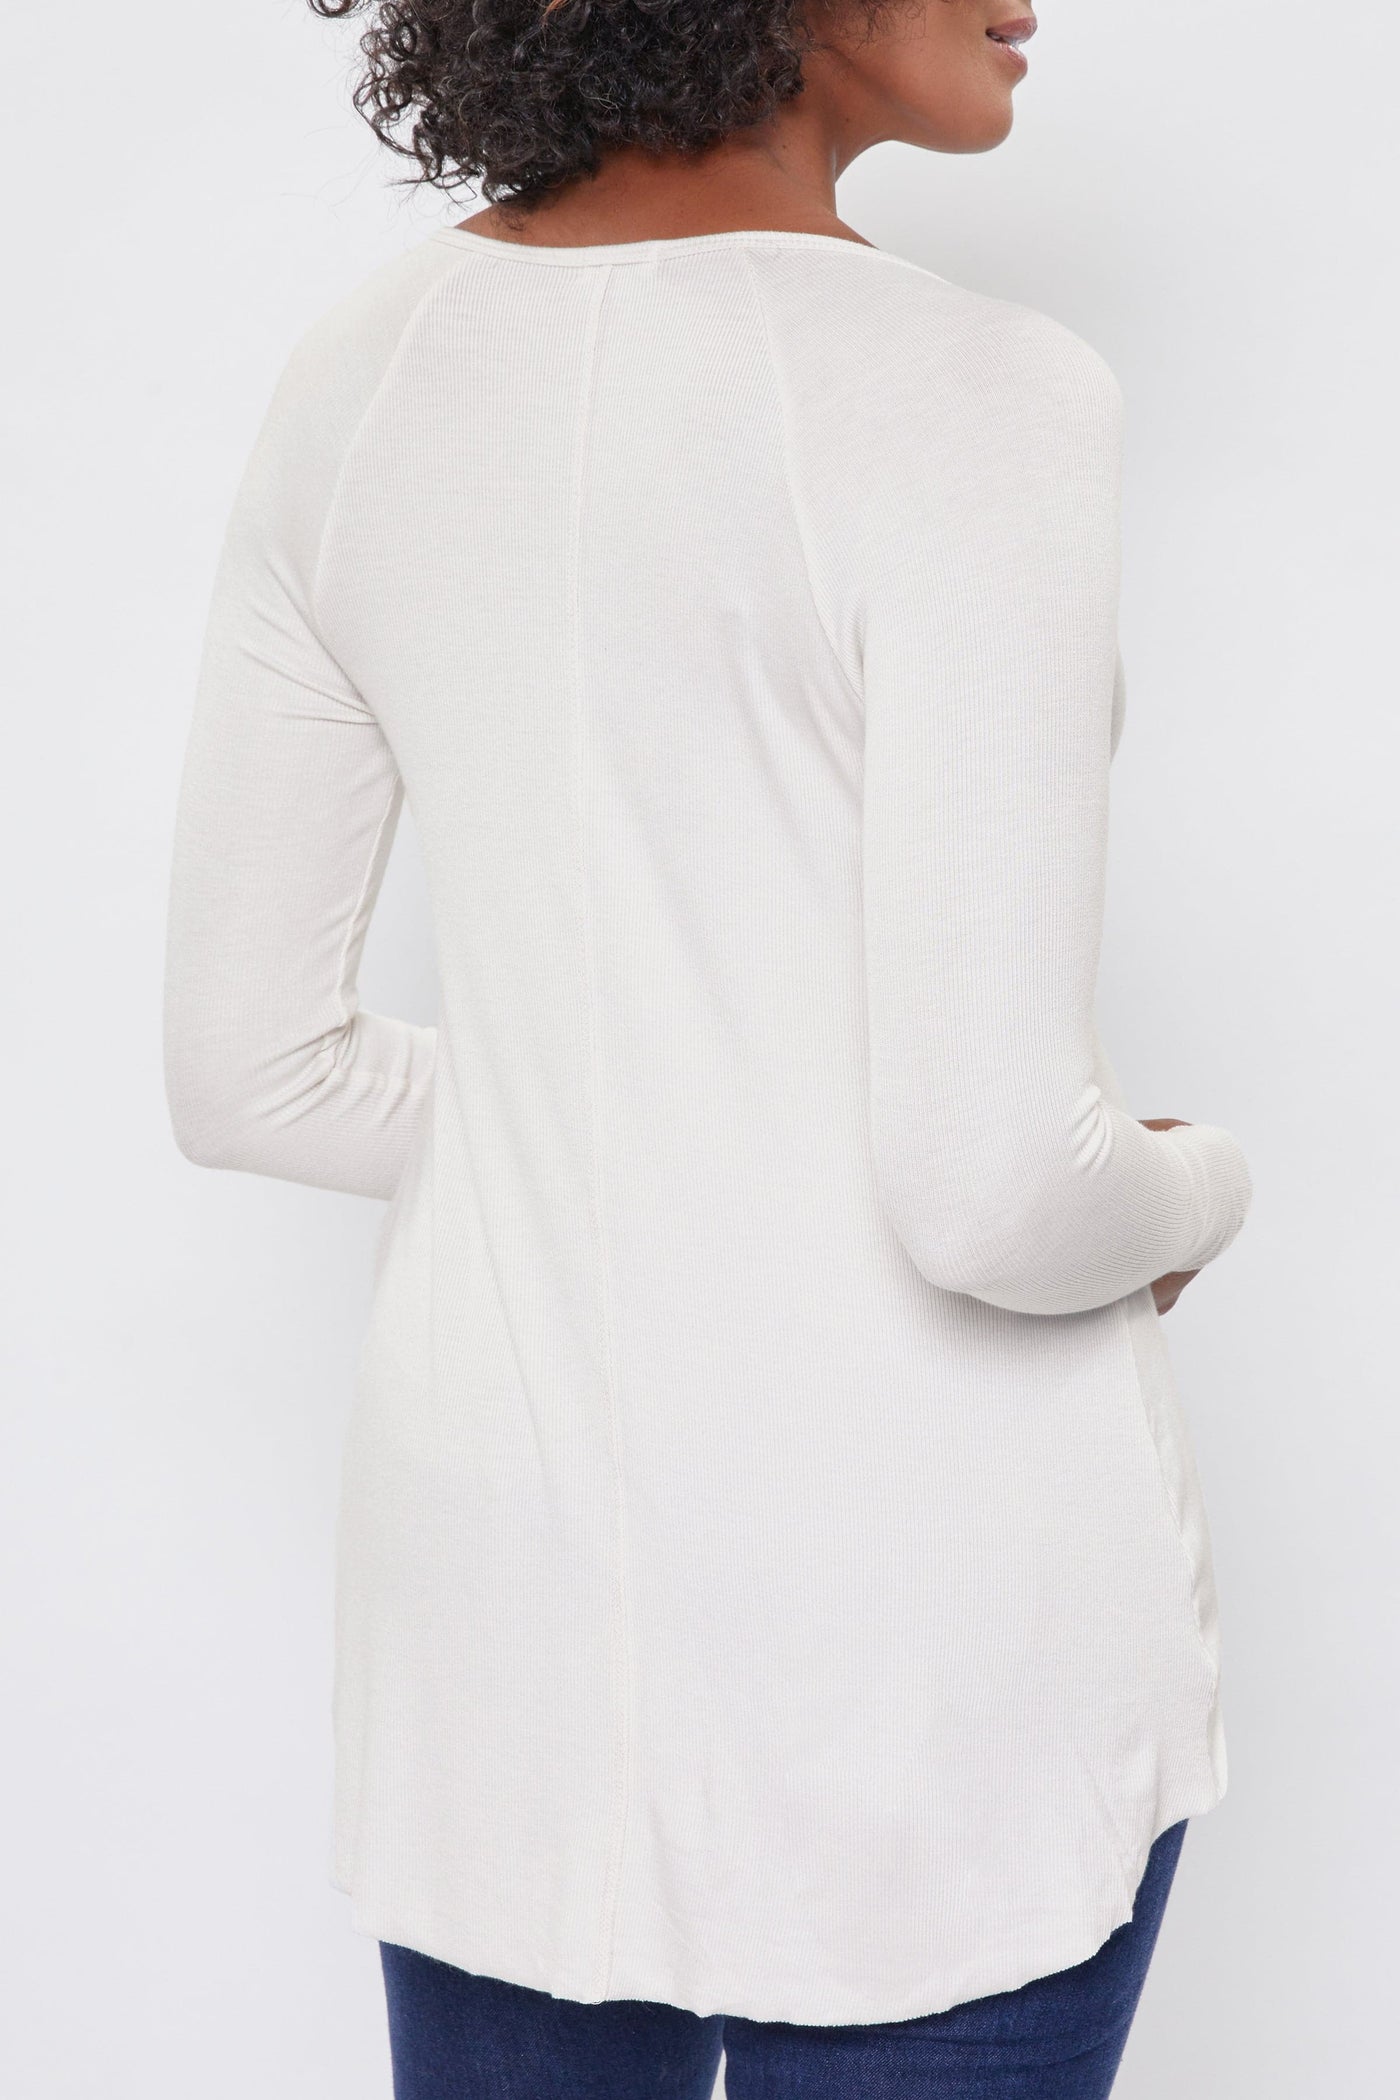 Women's Long Sleeve Ribbed Tee With Notched Collar Deal